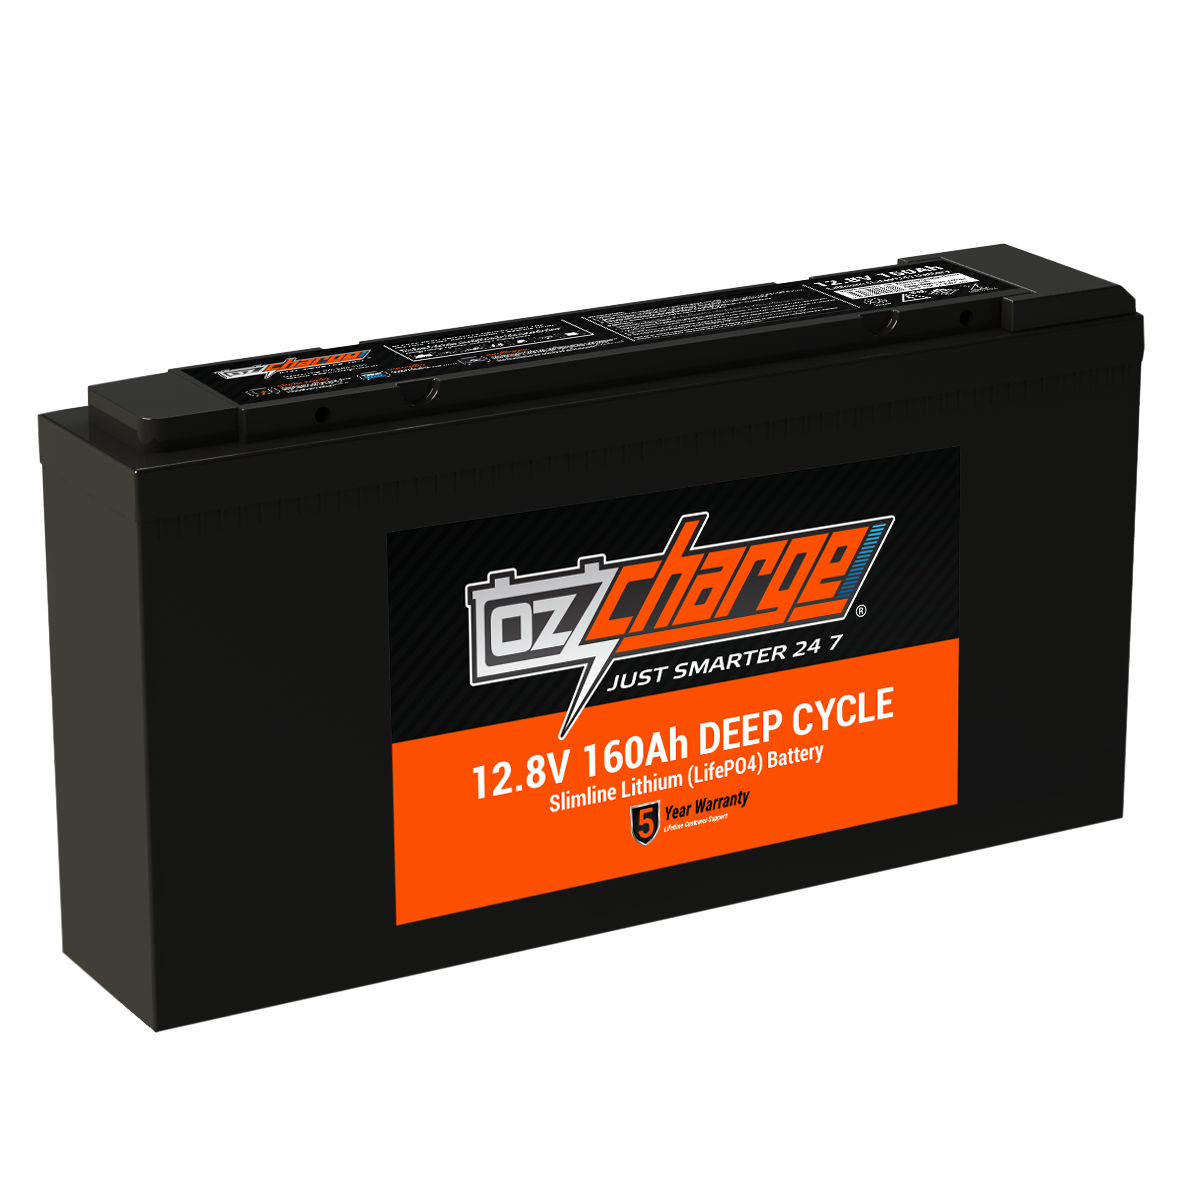 12V 160Ah Lithium Slimline Front Access LifePO4 Deep Cycle Battery